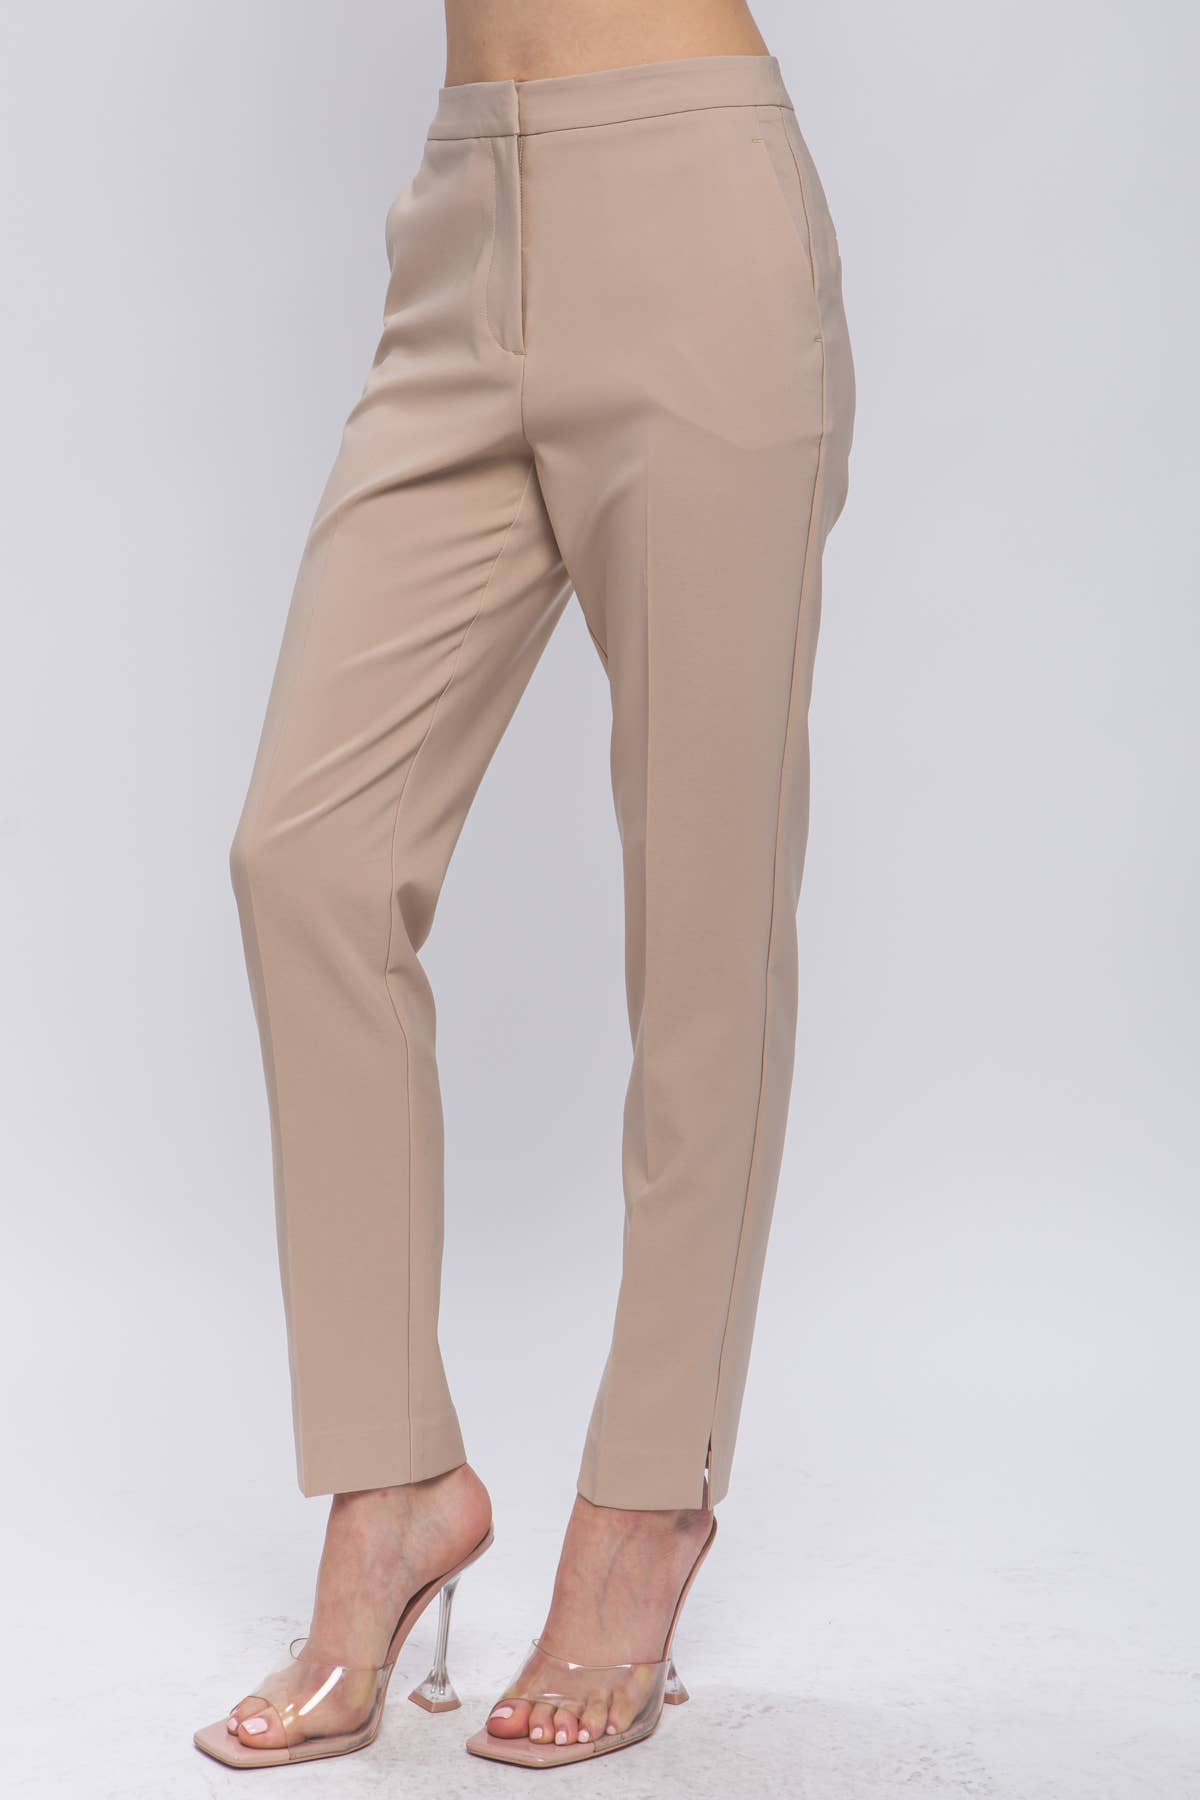 Woven Solid Formal Ankle Pants